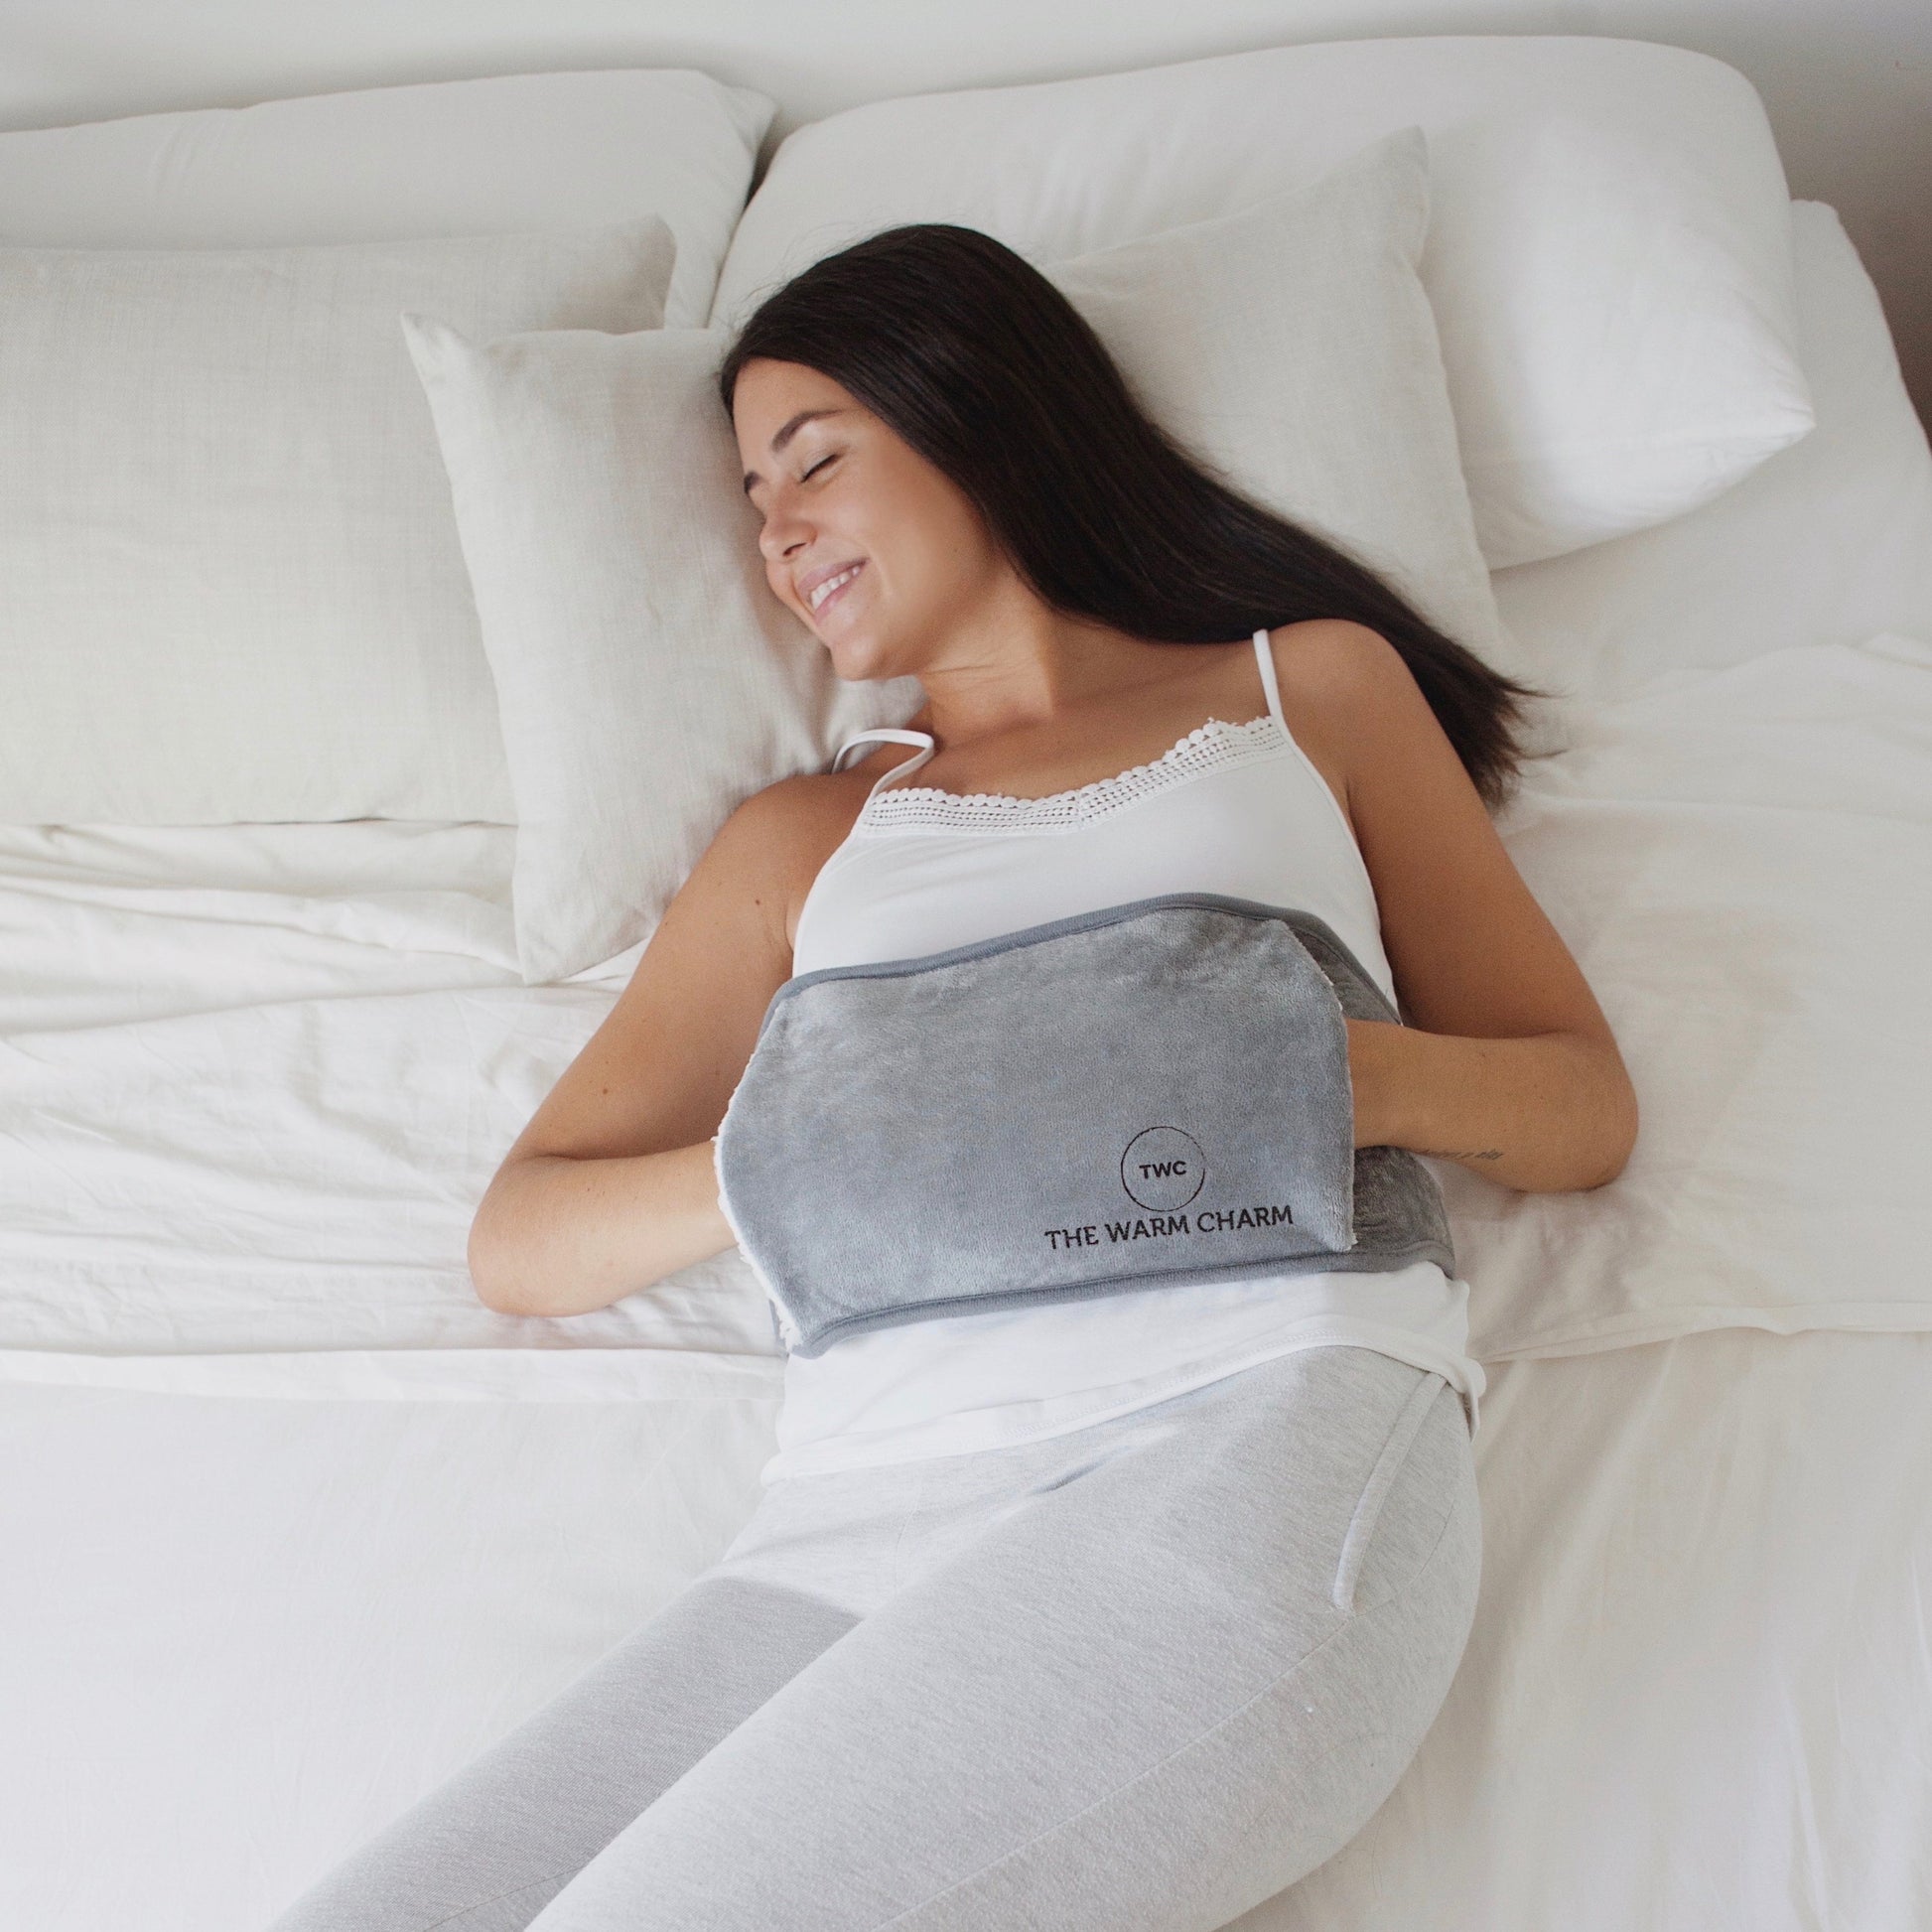 lie in bed with electric heat pack with belt for abdominal pain relief